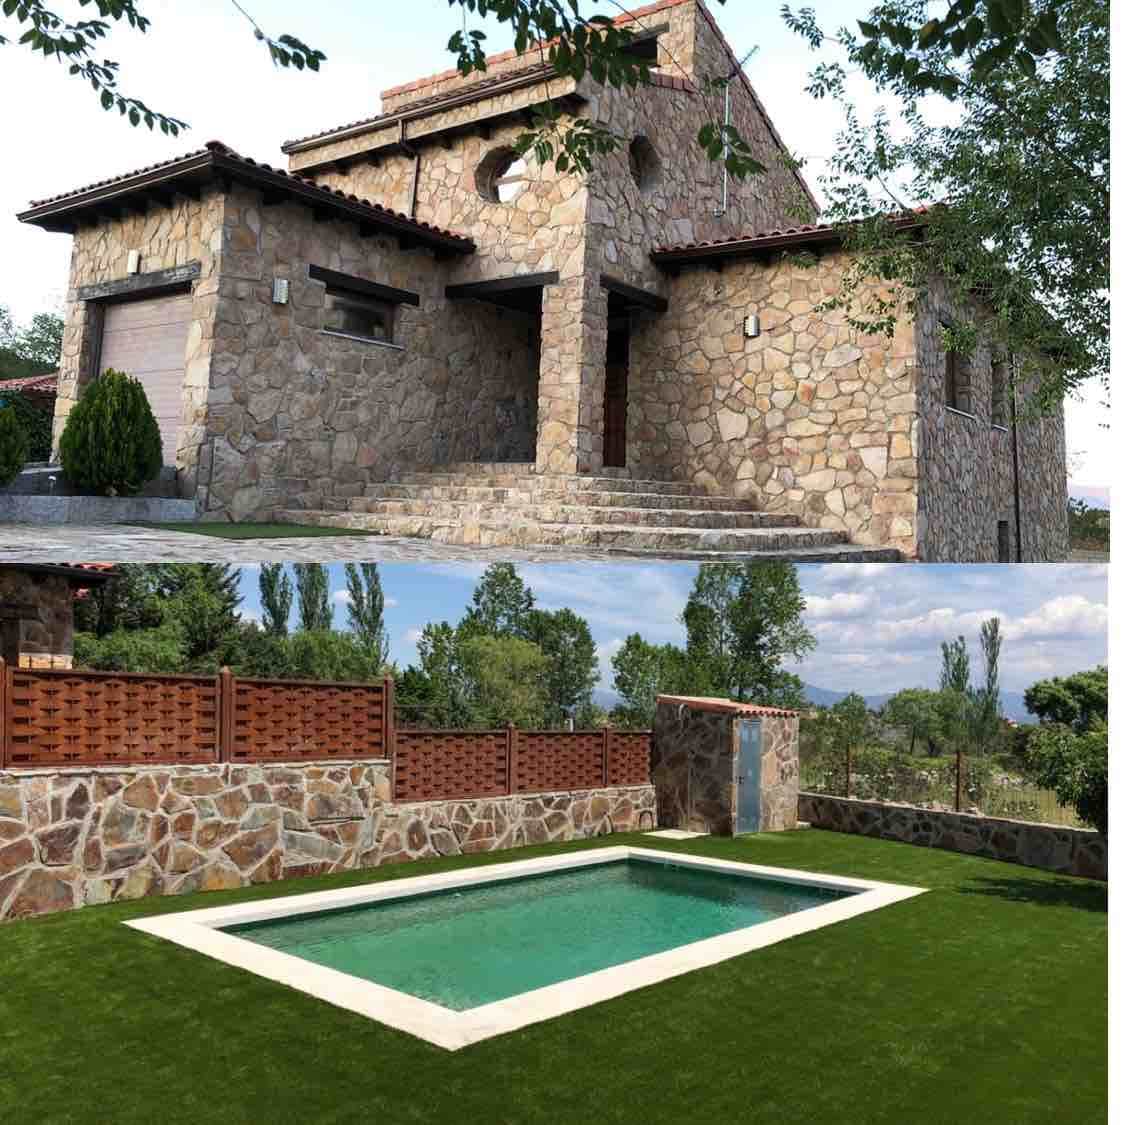 Los Nerios Pool Countryside House